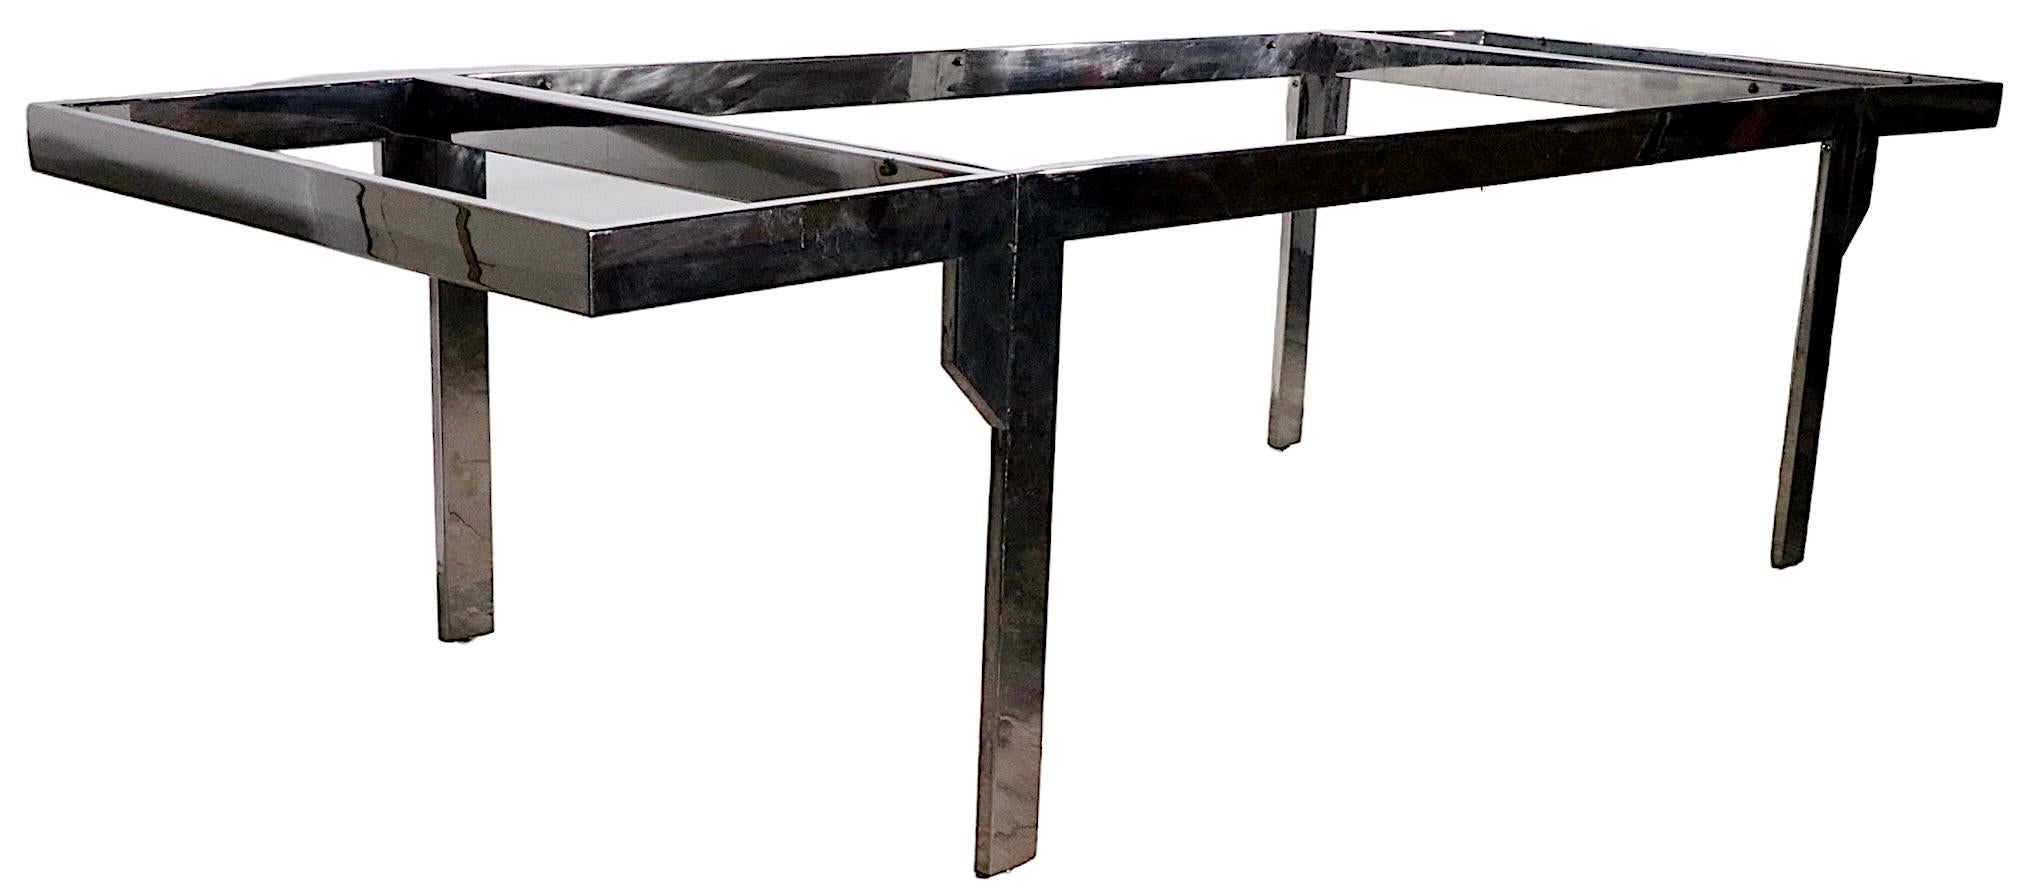 Chrome Extension Dining Table with Removable Chrome Console Leaves by Baughman 8